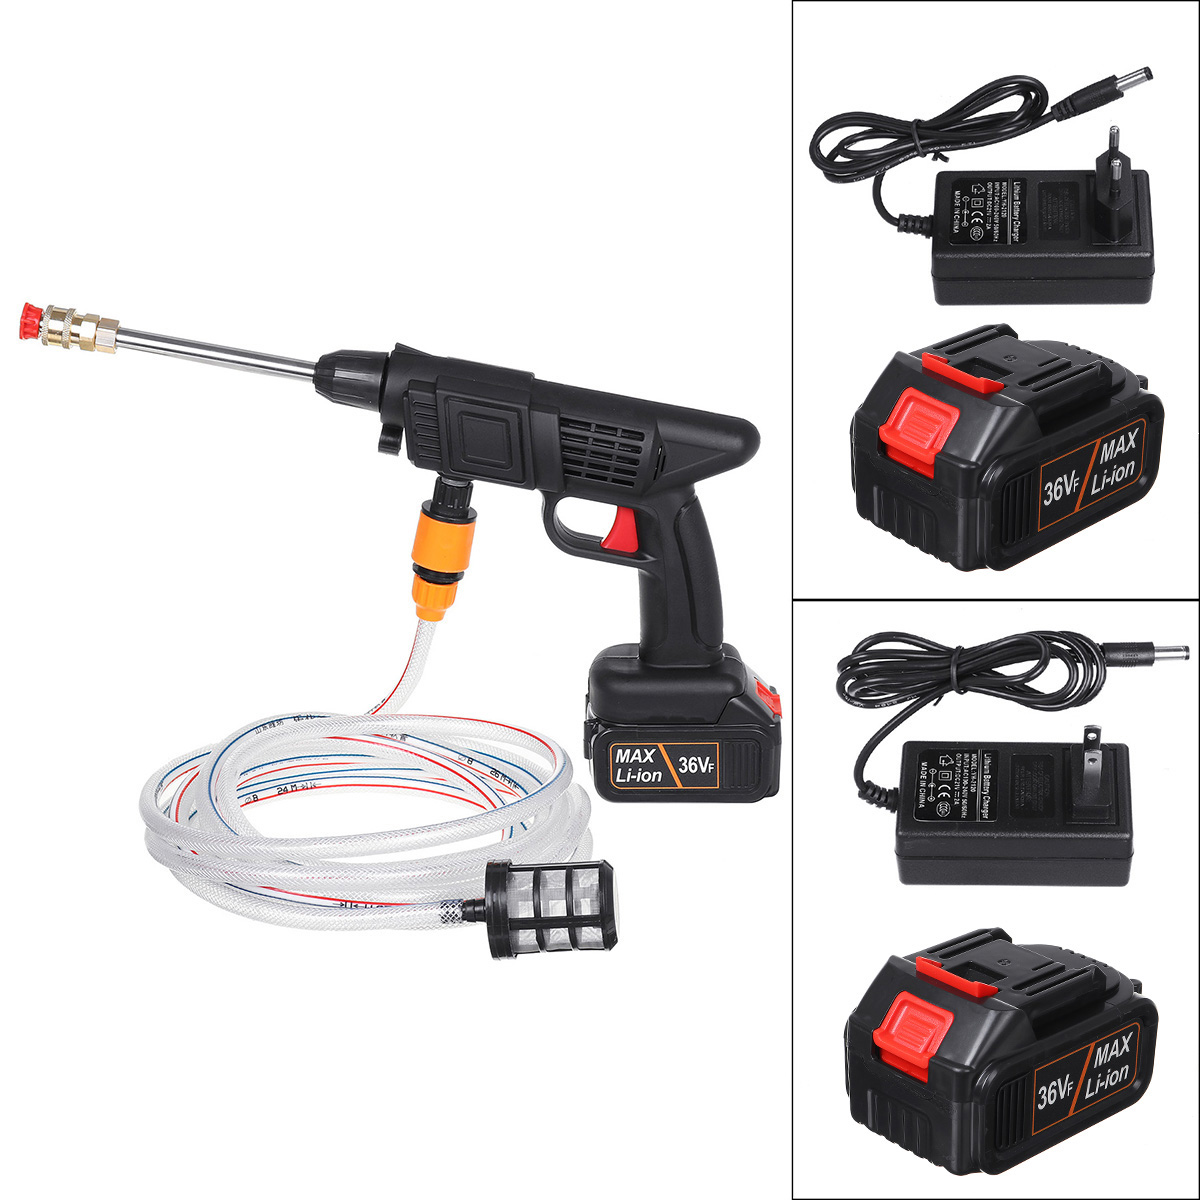 36V-High-Pressure-Washer-Cleaner-Pumps-Electric-Cordless-Car-Washing-Guns-Water-Hose-Cleaning-W-12pc-1845262-15